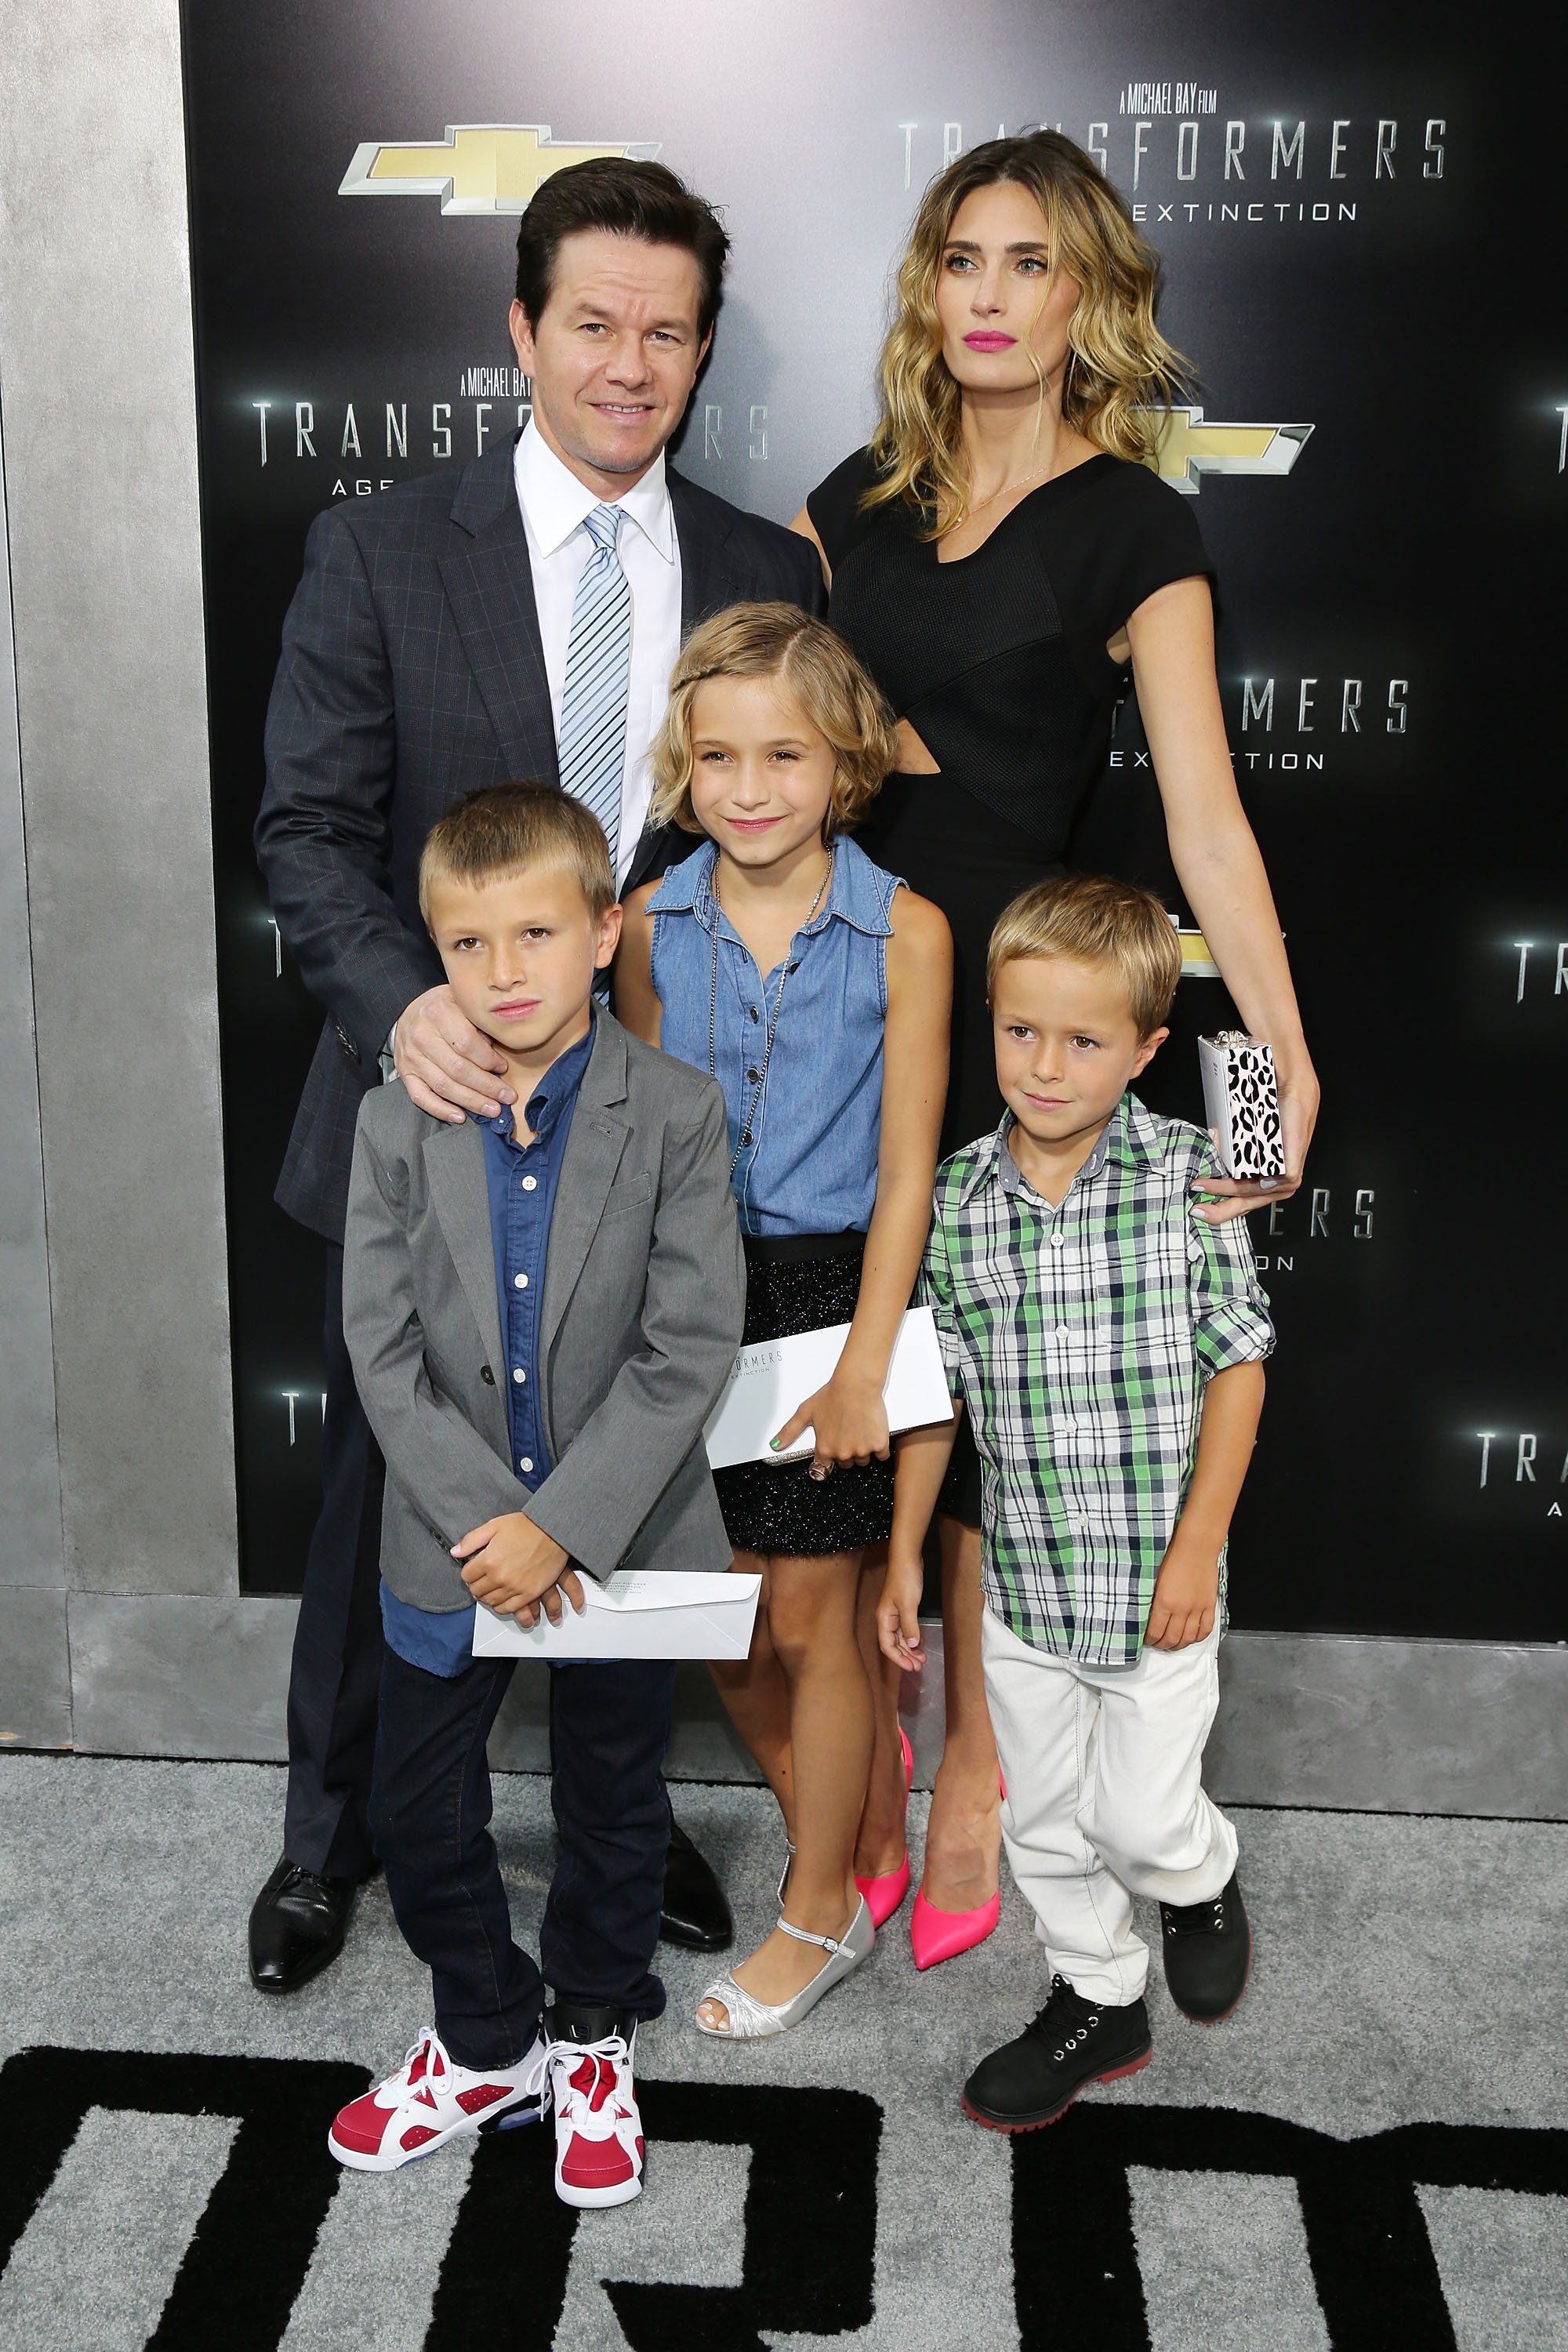 Actor Mark Wahlberg with wife Rhea Durham and their children Michael, Ella Rae, and Brendan at the Ziegfeld Theatre on June 25, 2014 in New York City. | Source: Getty Images